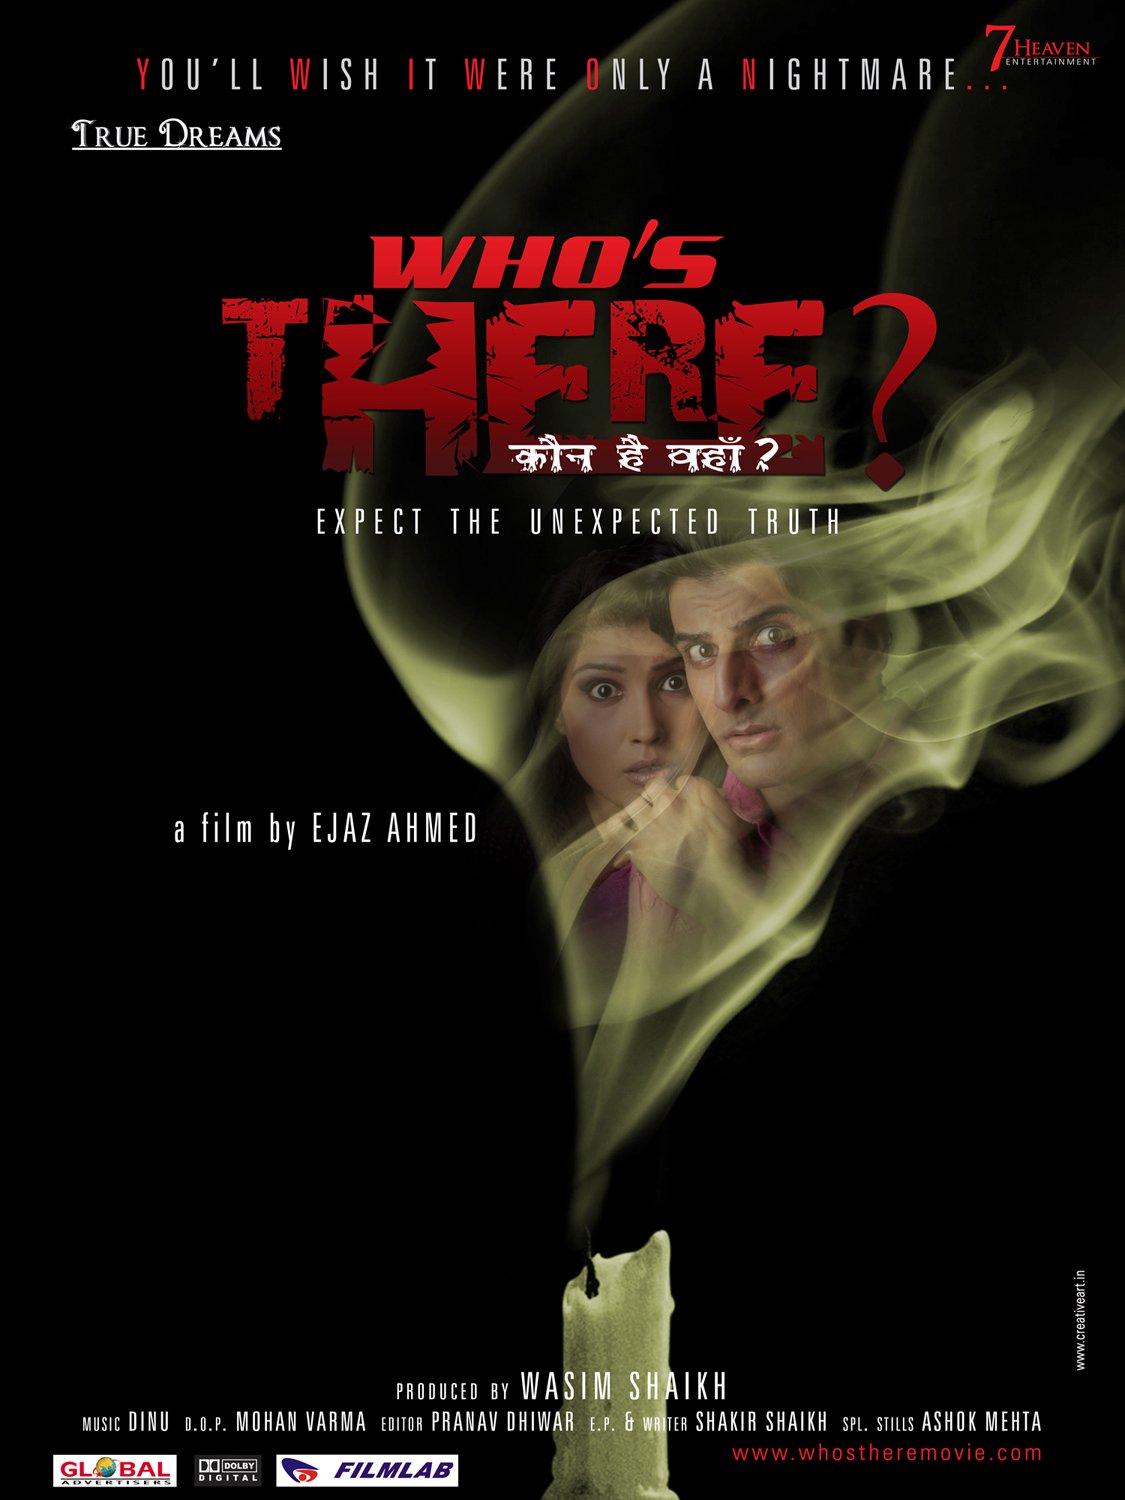 Extra Large Movie Poster Image for Who's There? (#4 of 6)